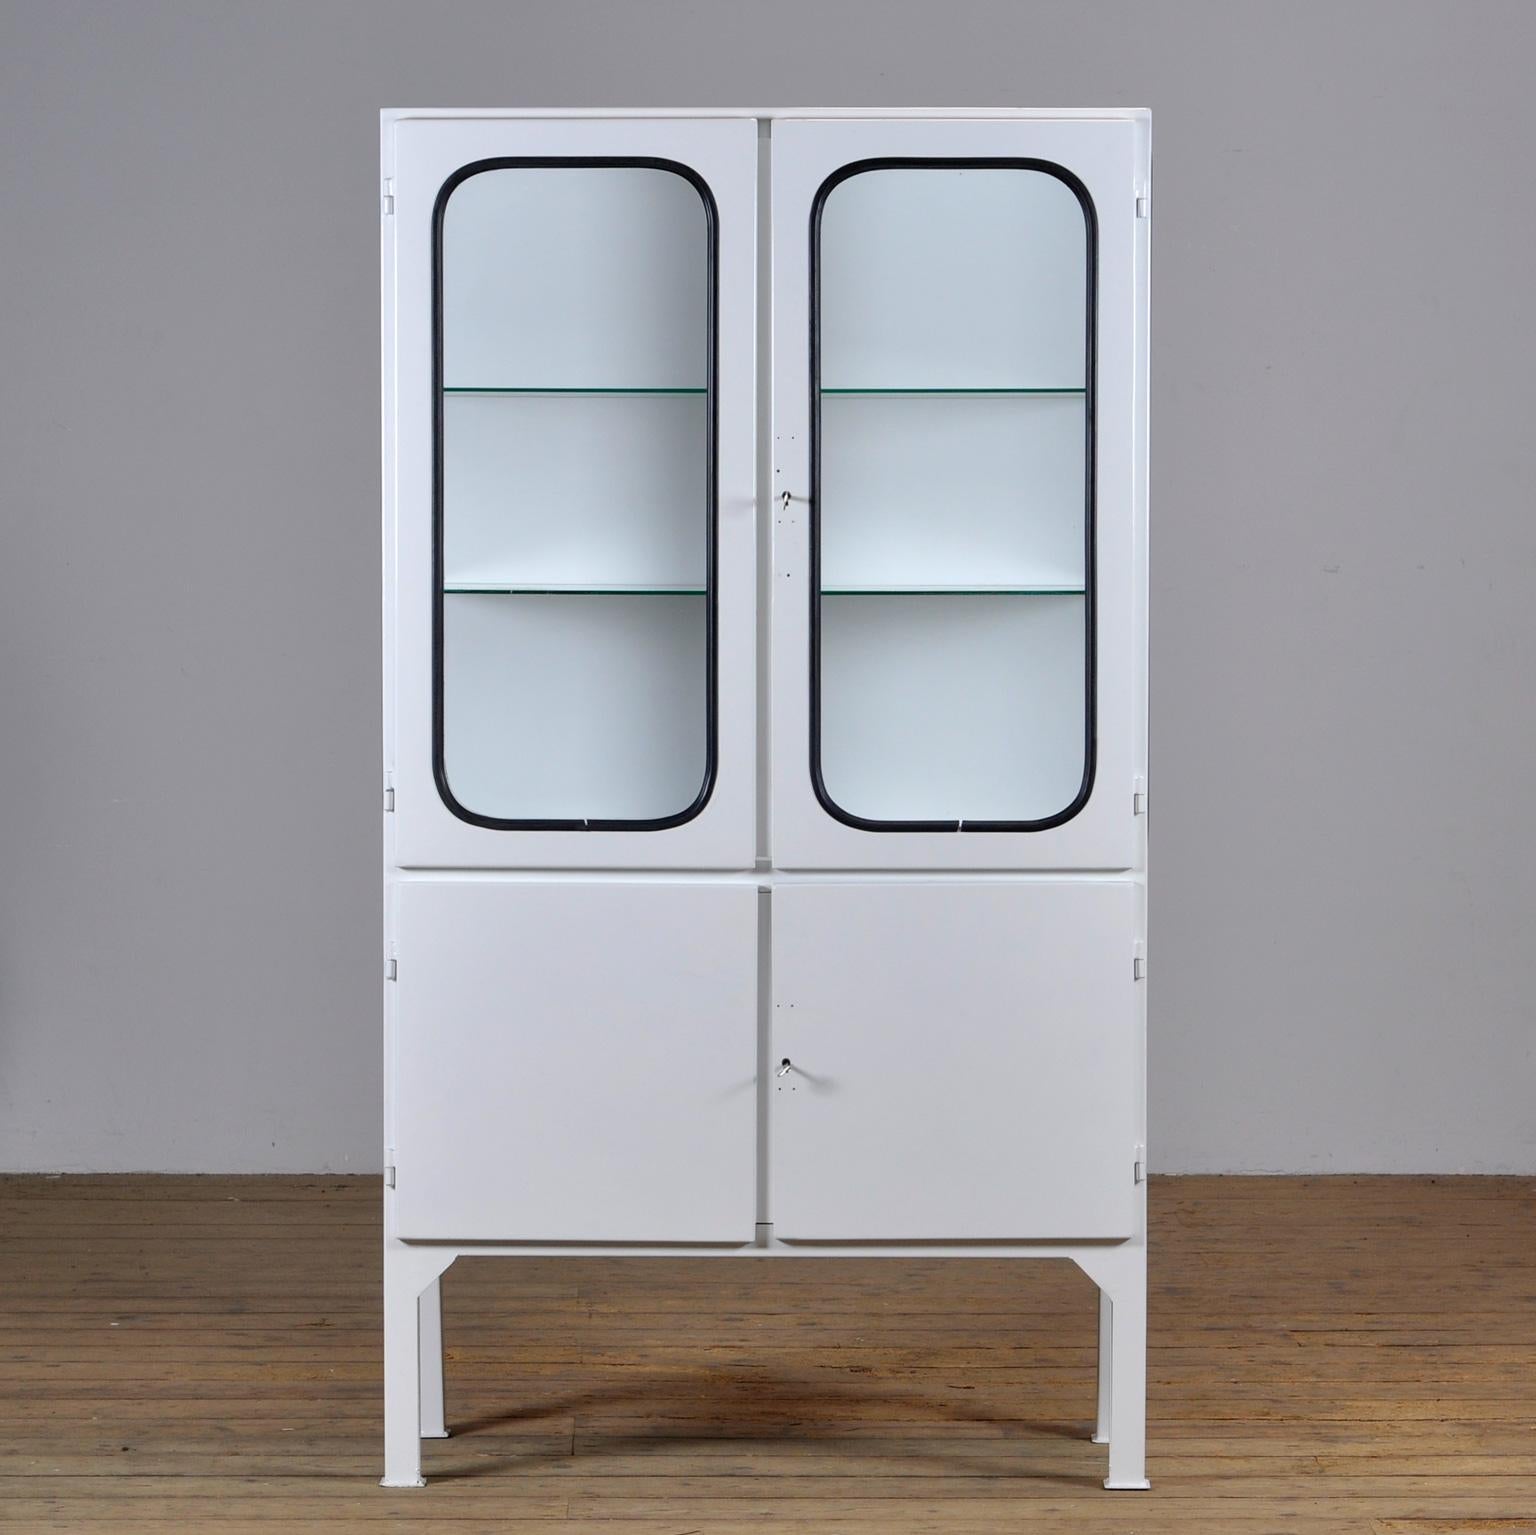 This medical cabinet was designed in the 1970s and was produced circa 1975 in hungary. It is made from iron and glass, and the glass is held by a black rubber strip. The cabinet features two adjustable glass shelves and functioning locks. 
The